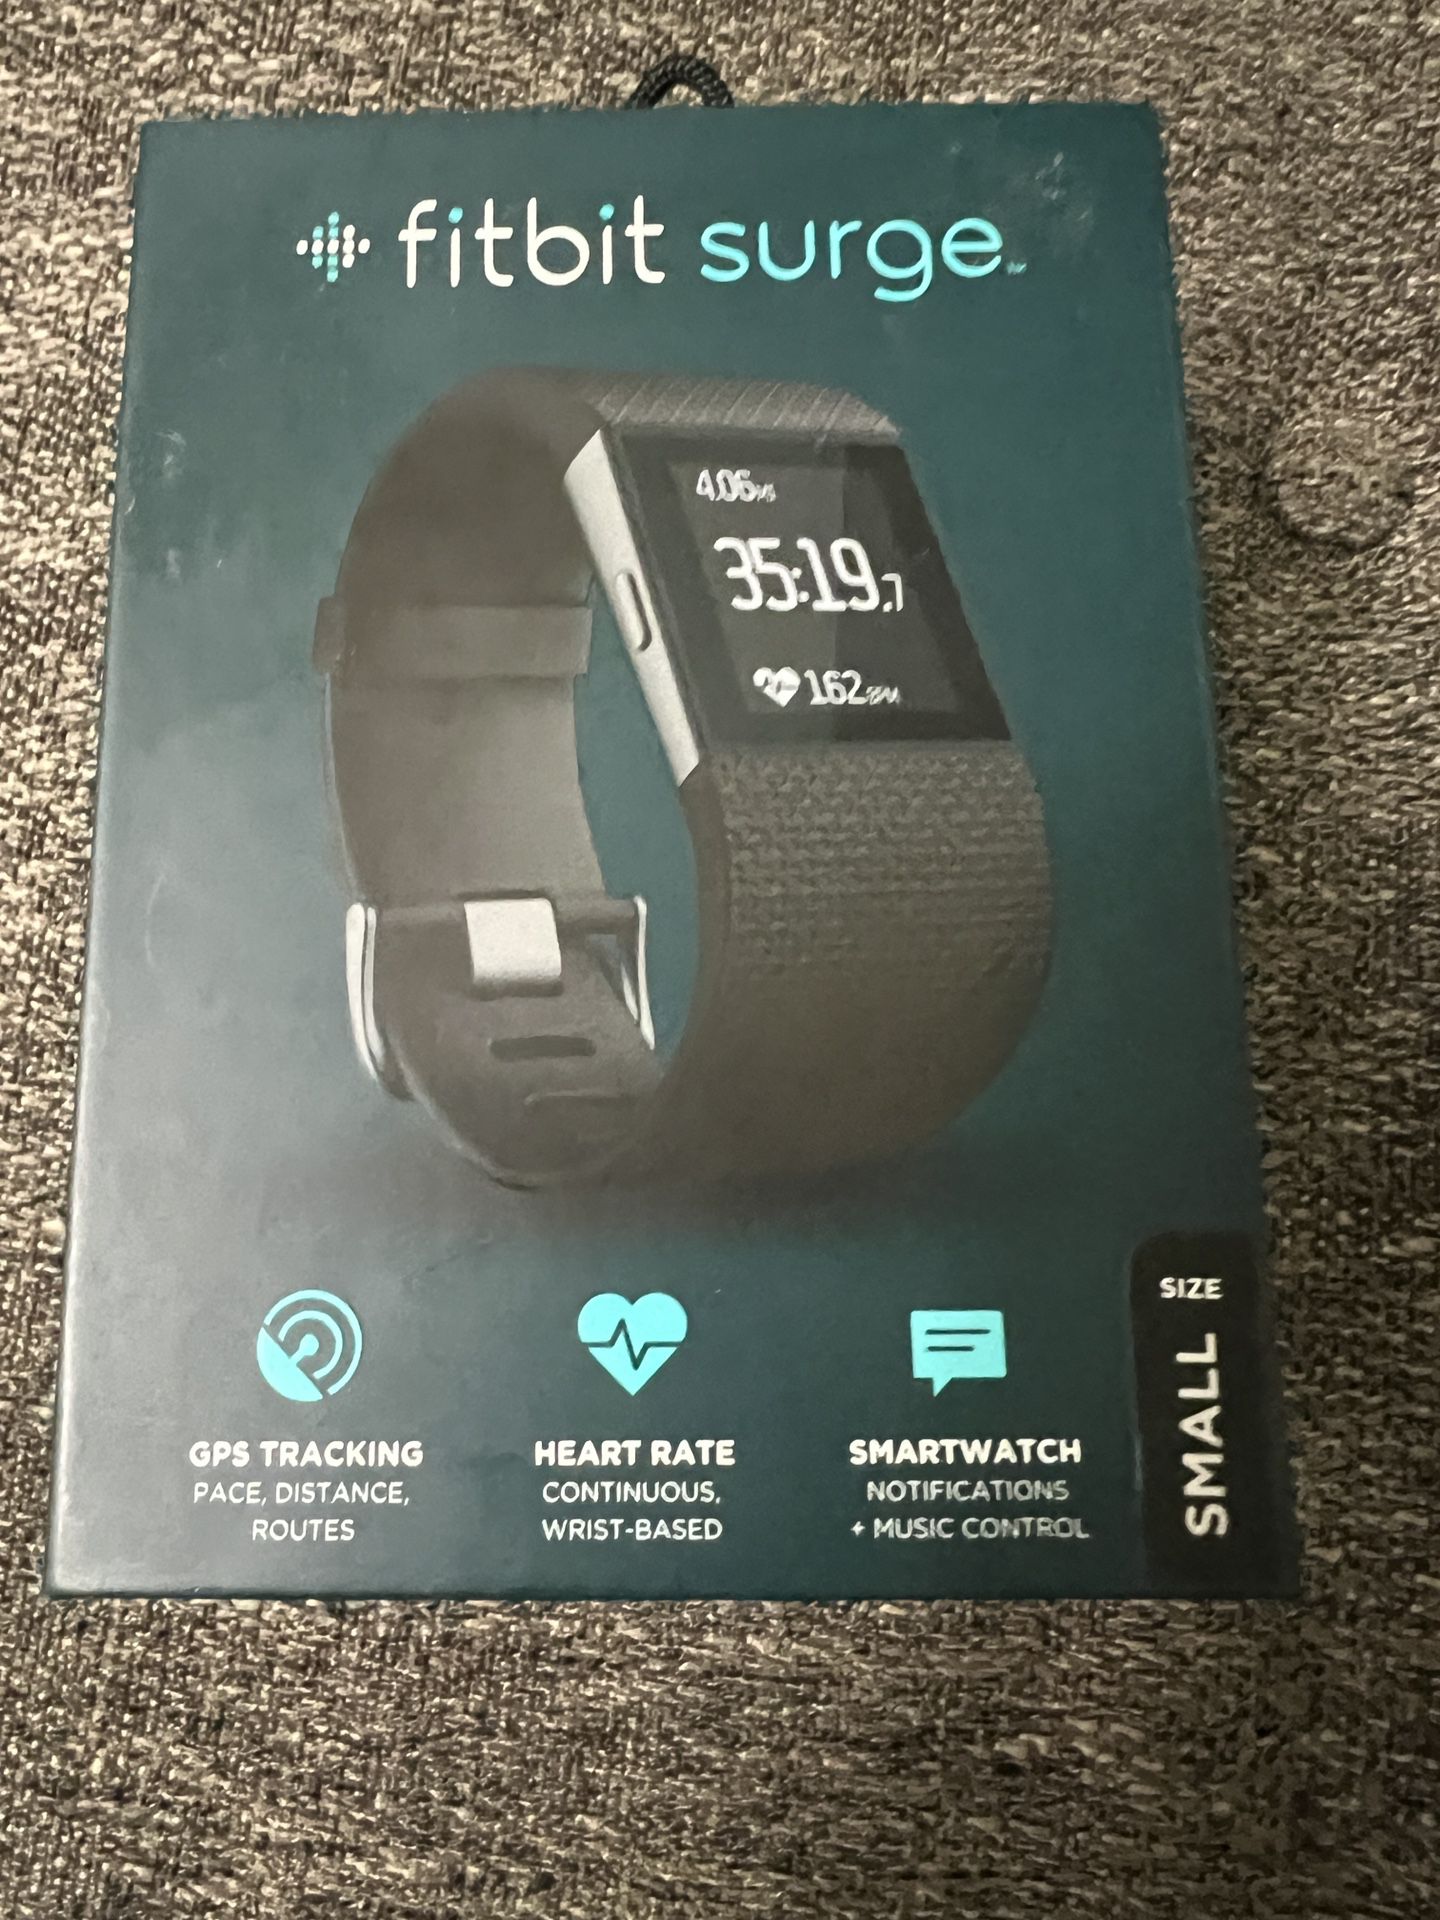 New in box Fitbit Surge